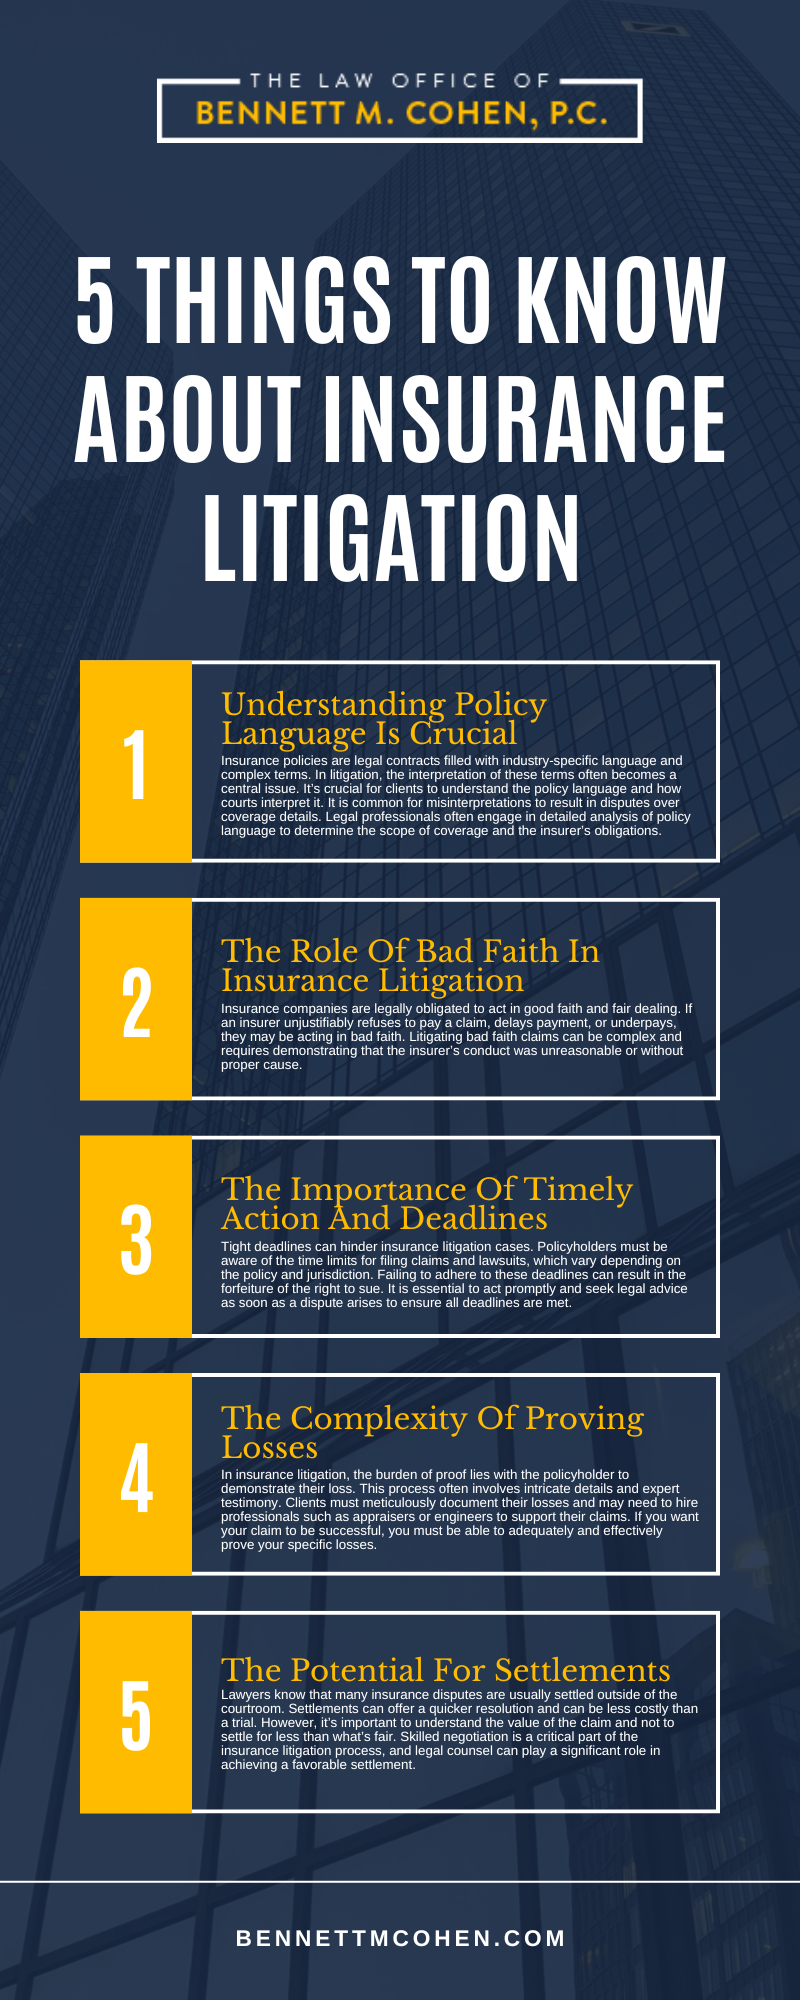 5 Things To Know About Insurance Litigation Infographic